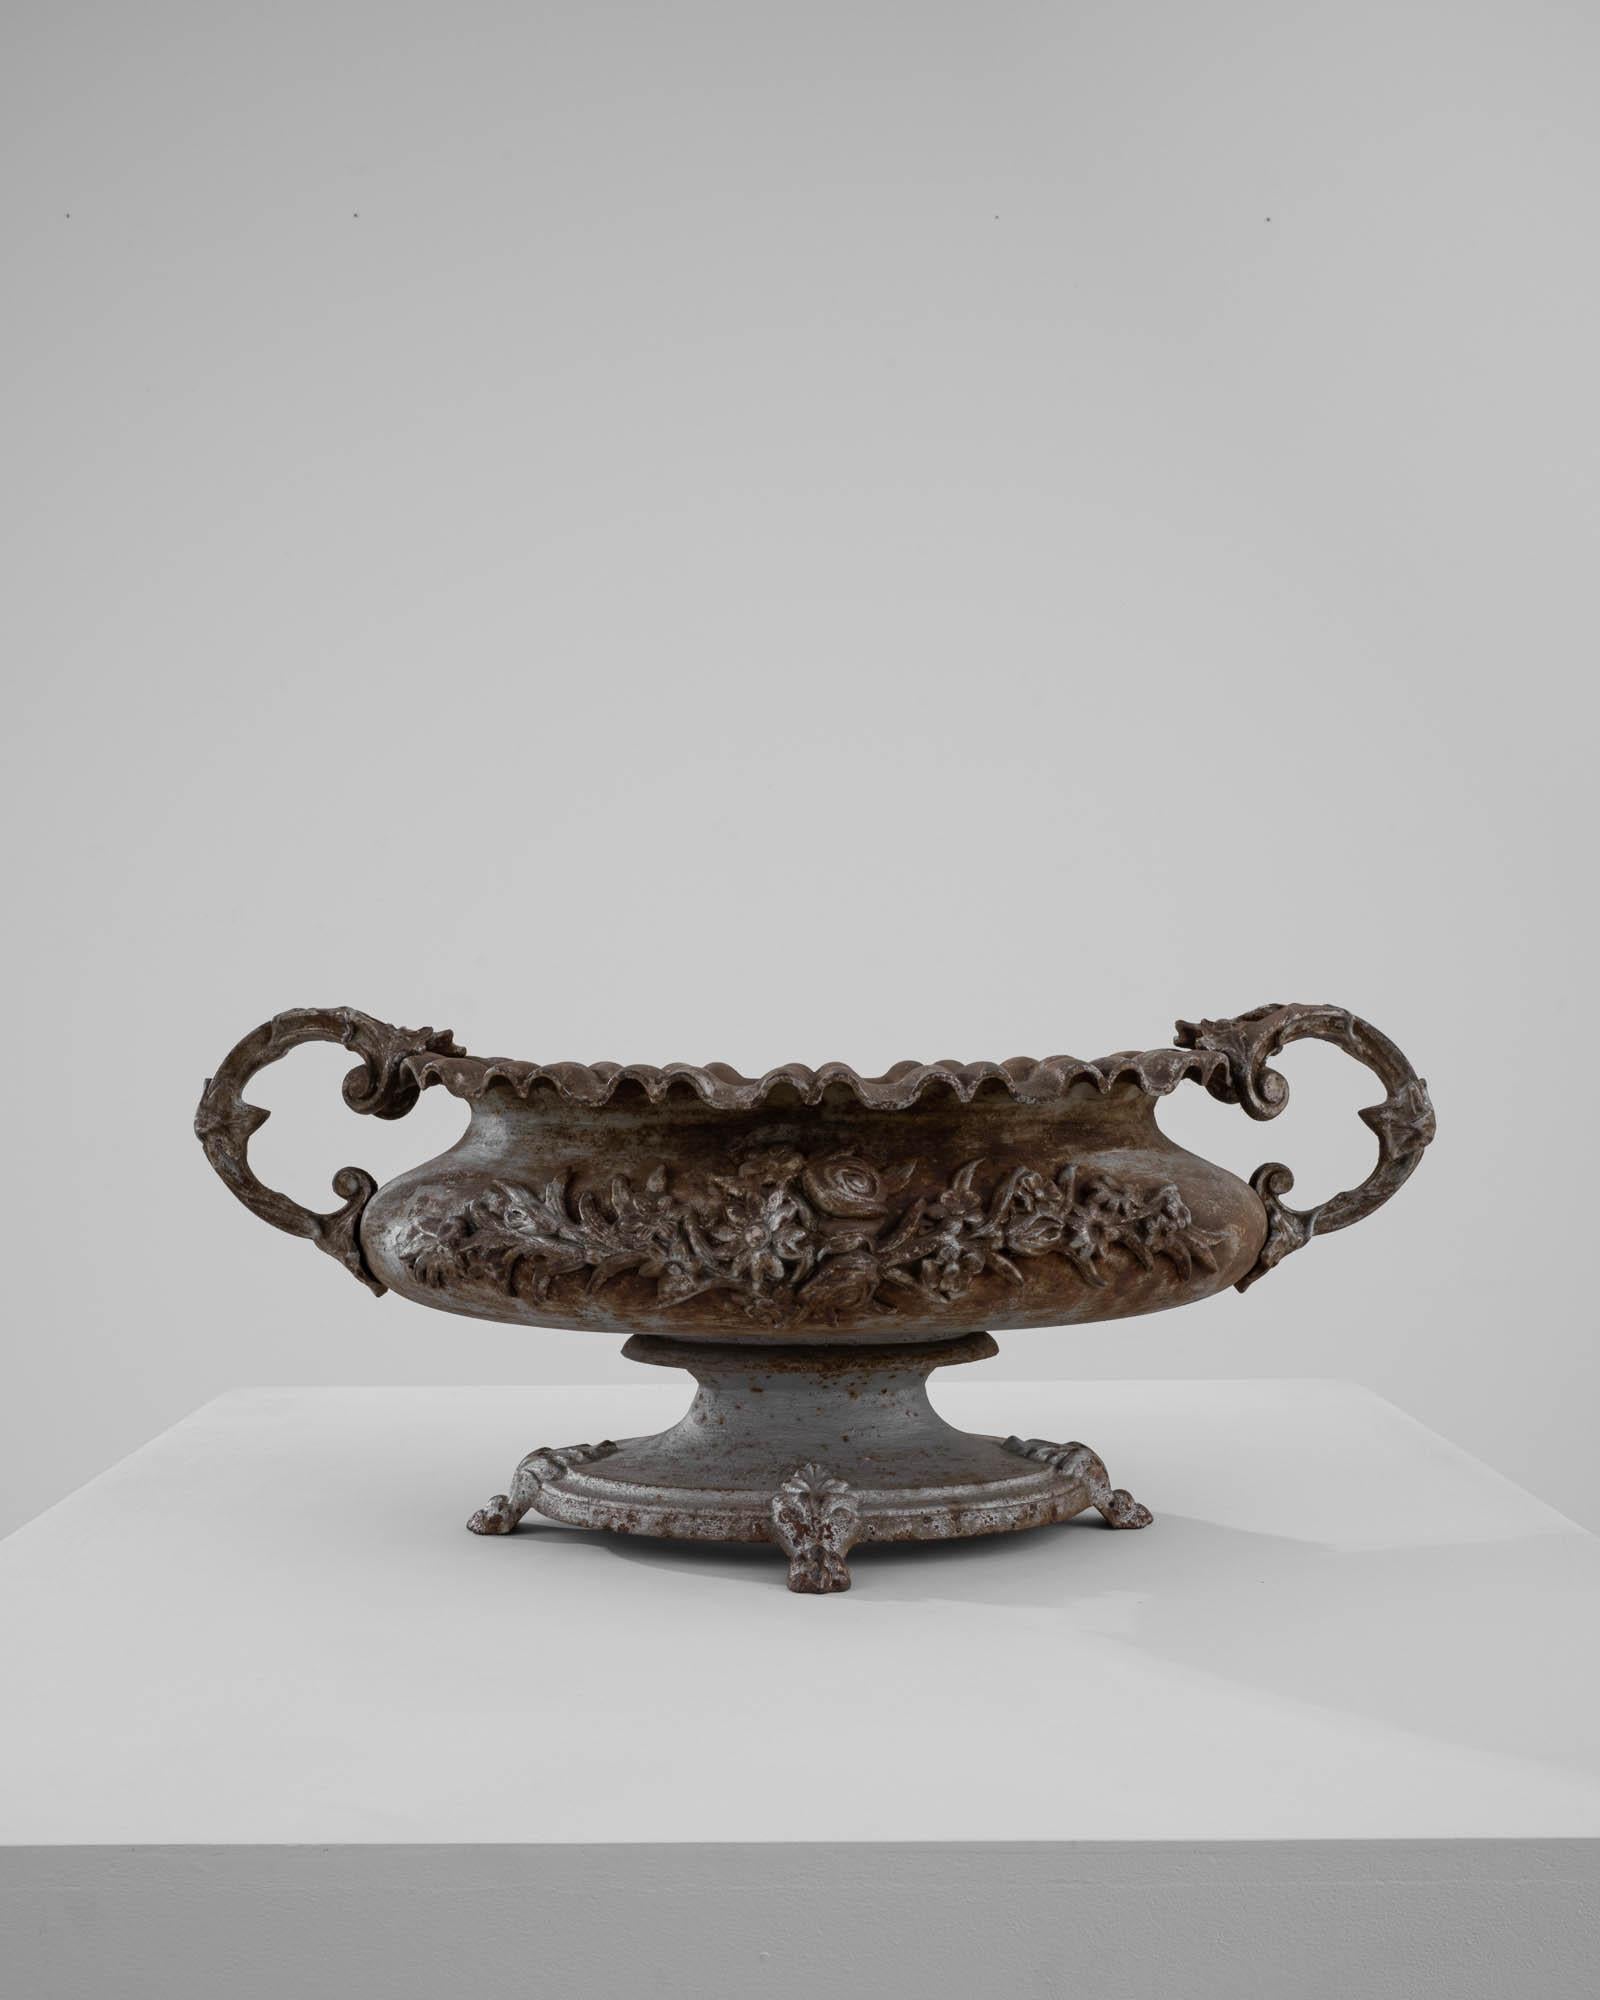 A cast iron planter from France, made in the 19th Century. The campana shape resembled an upturned bell with a fluted cupola and broad lip, reminiscent of an opening blossom. Weathered over the years, the cast iron has acquired a striking layered